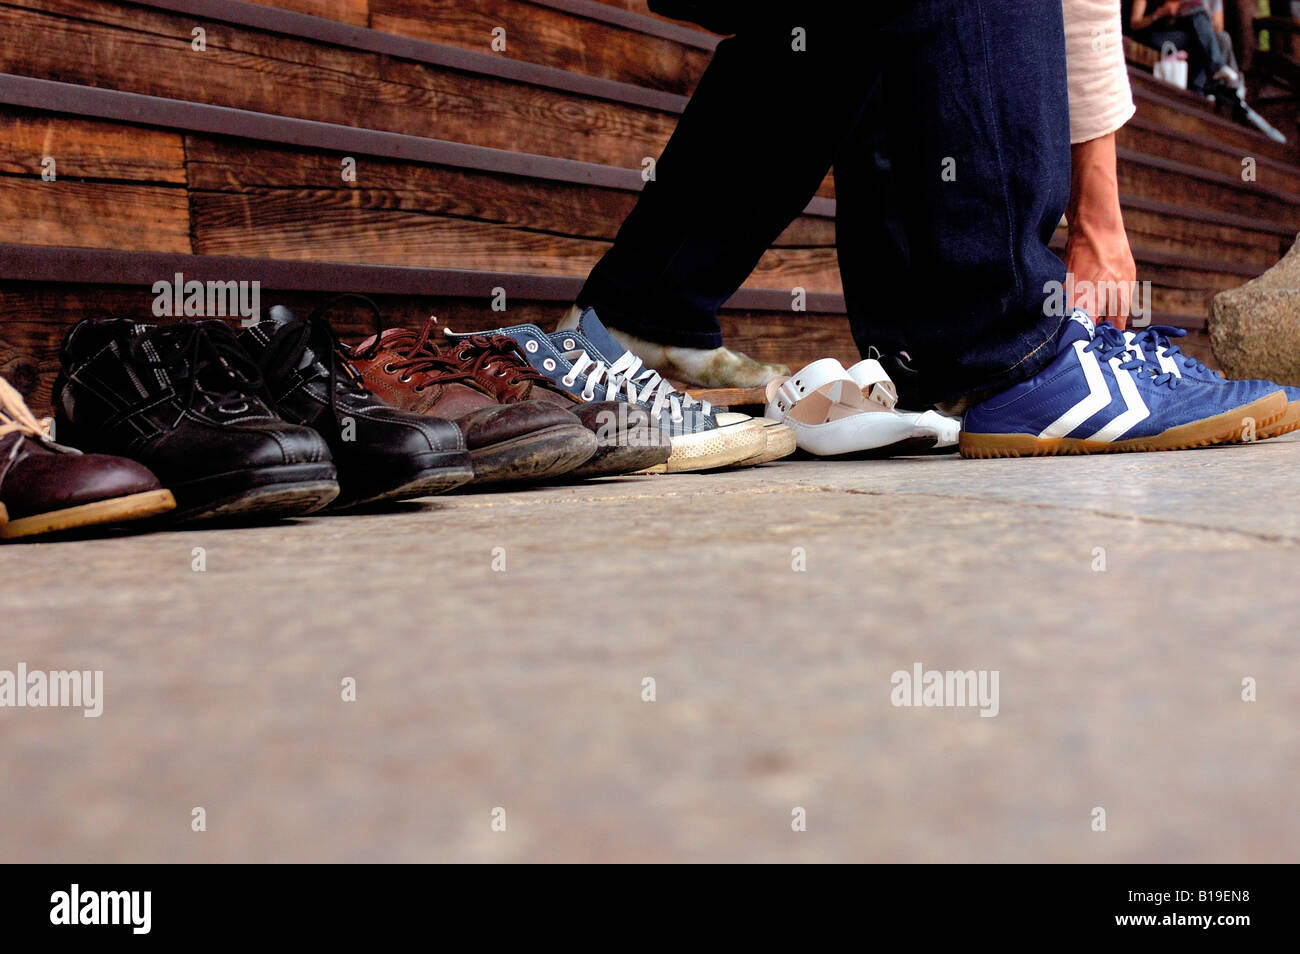 shoes-at-temple-kyoto-japan-stock-photo-alamy